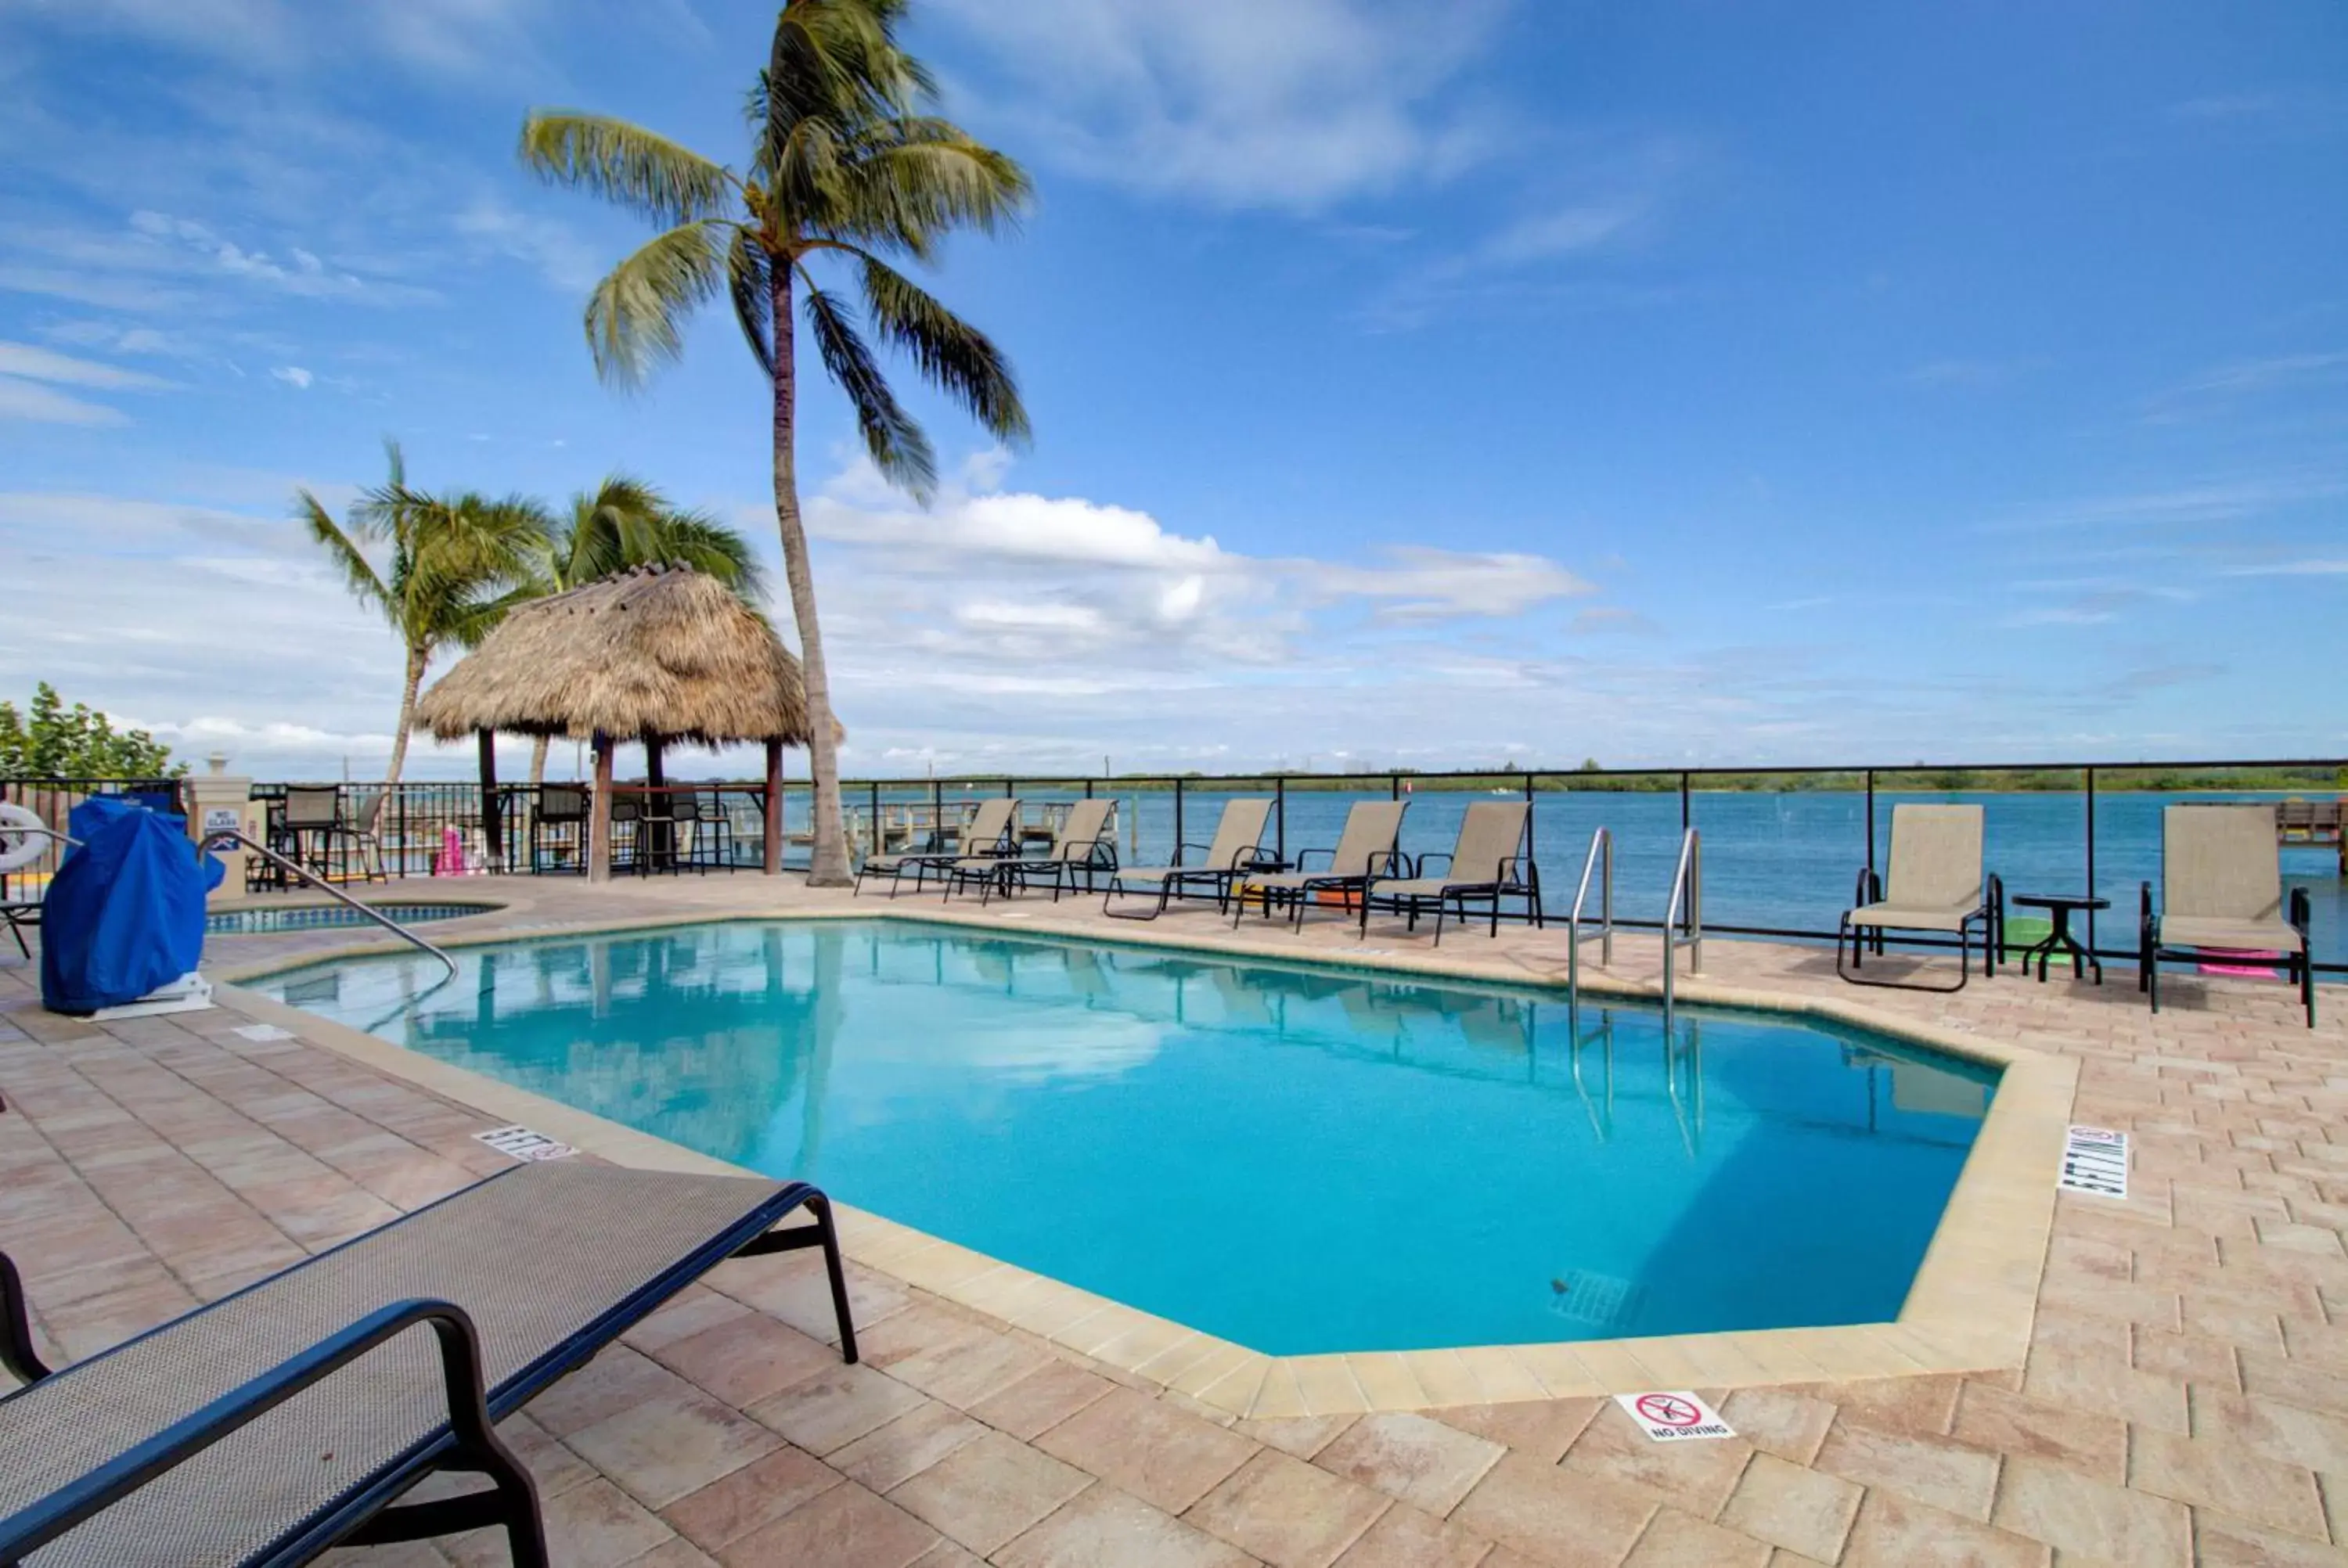 Swimming Pool in Hutchinson Island Plaza Hotel & Suites